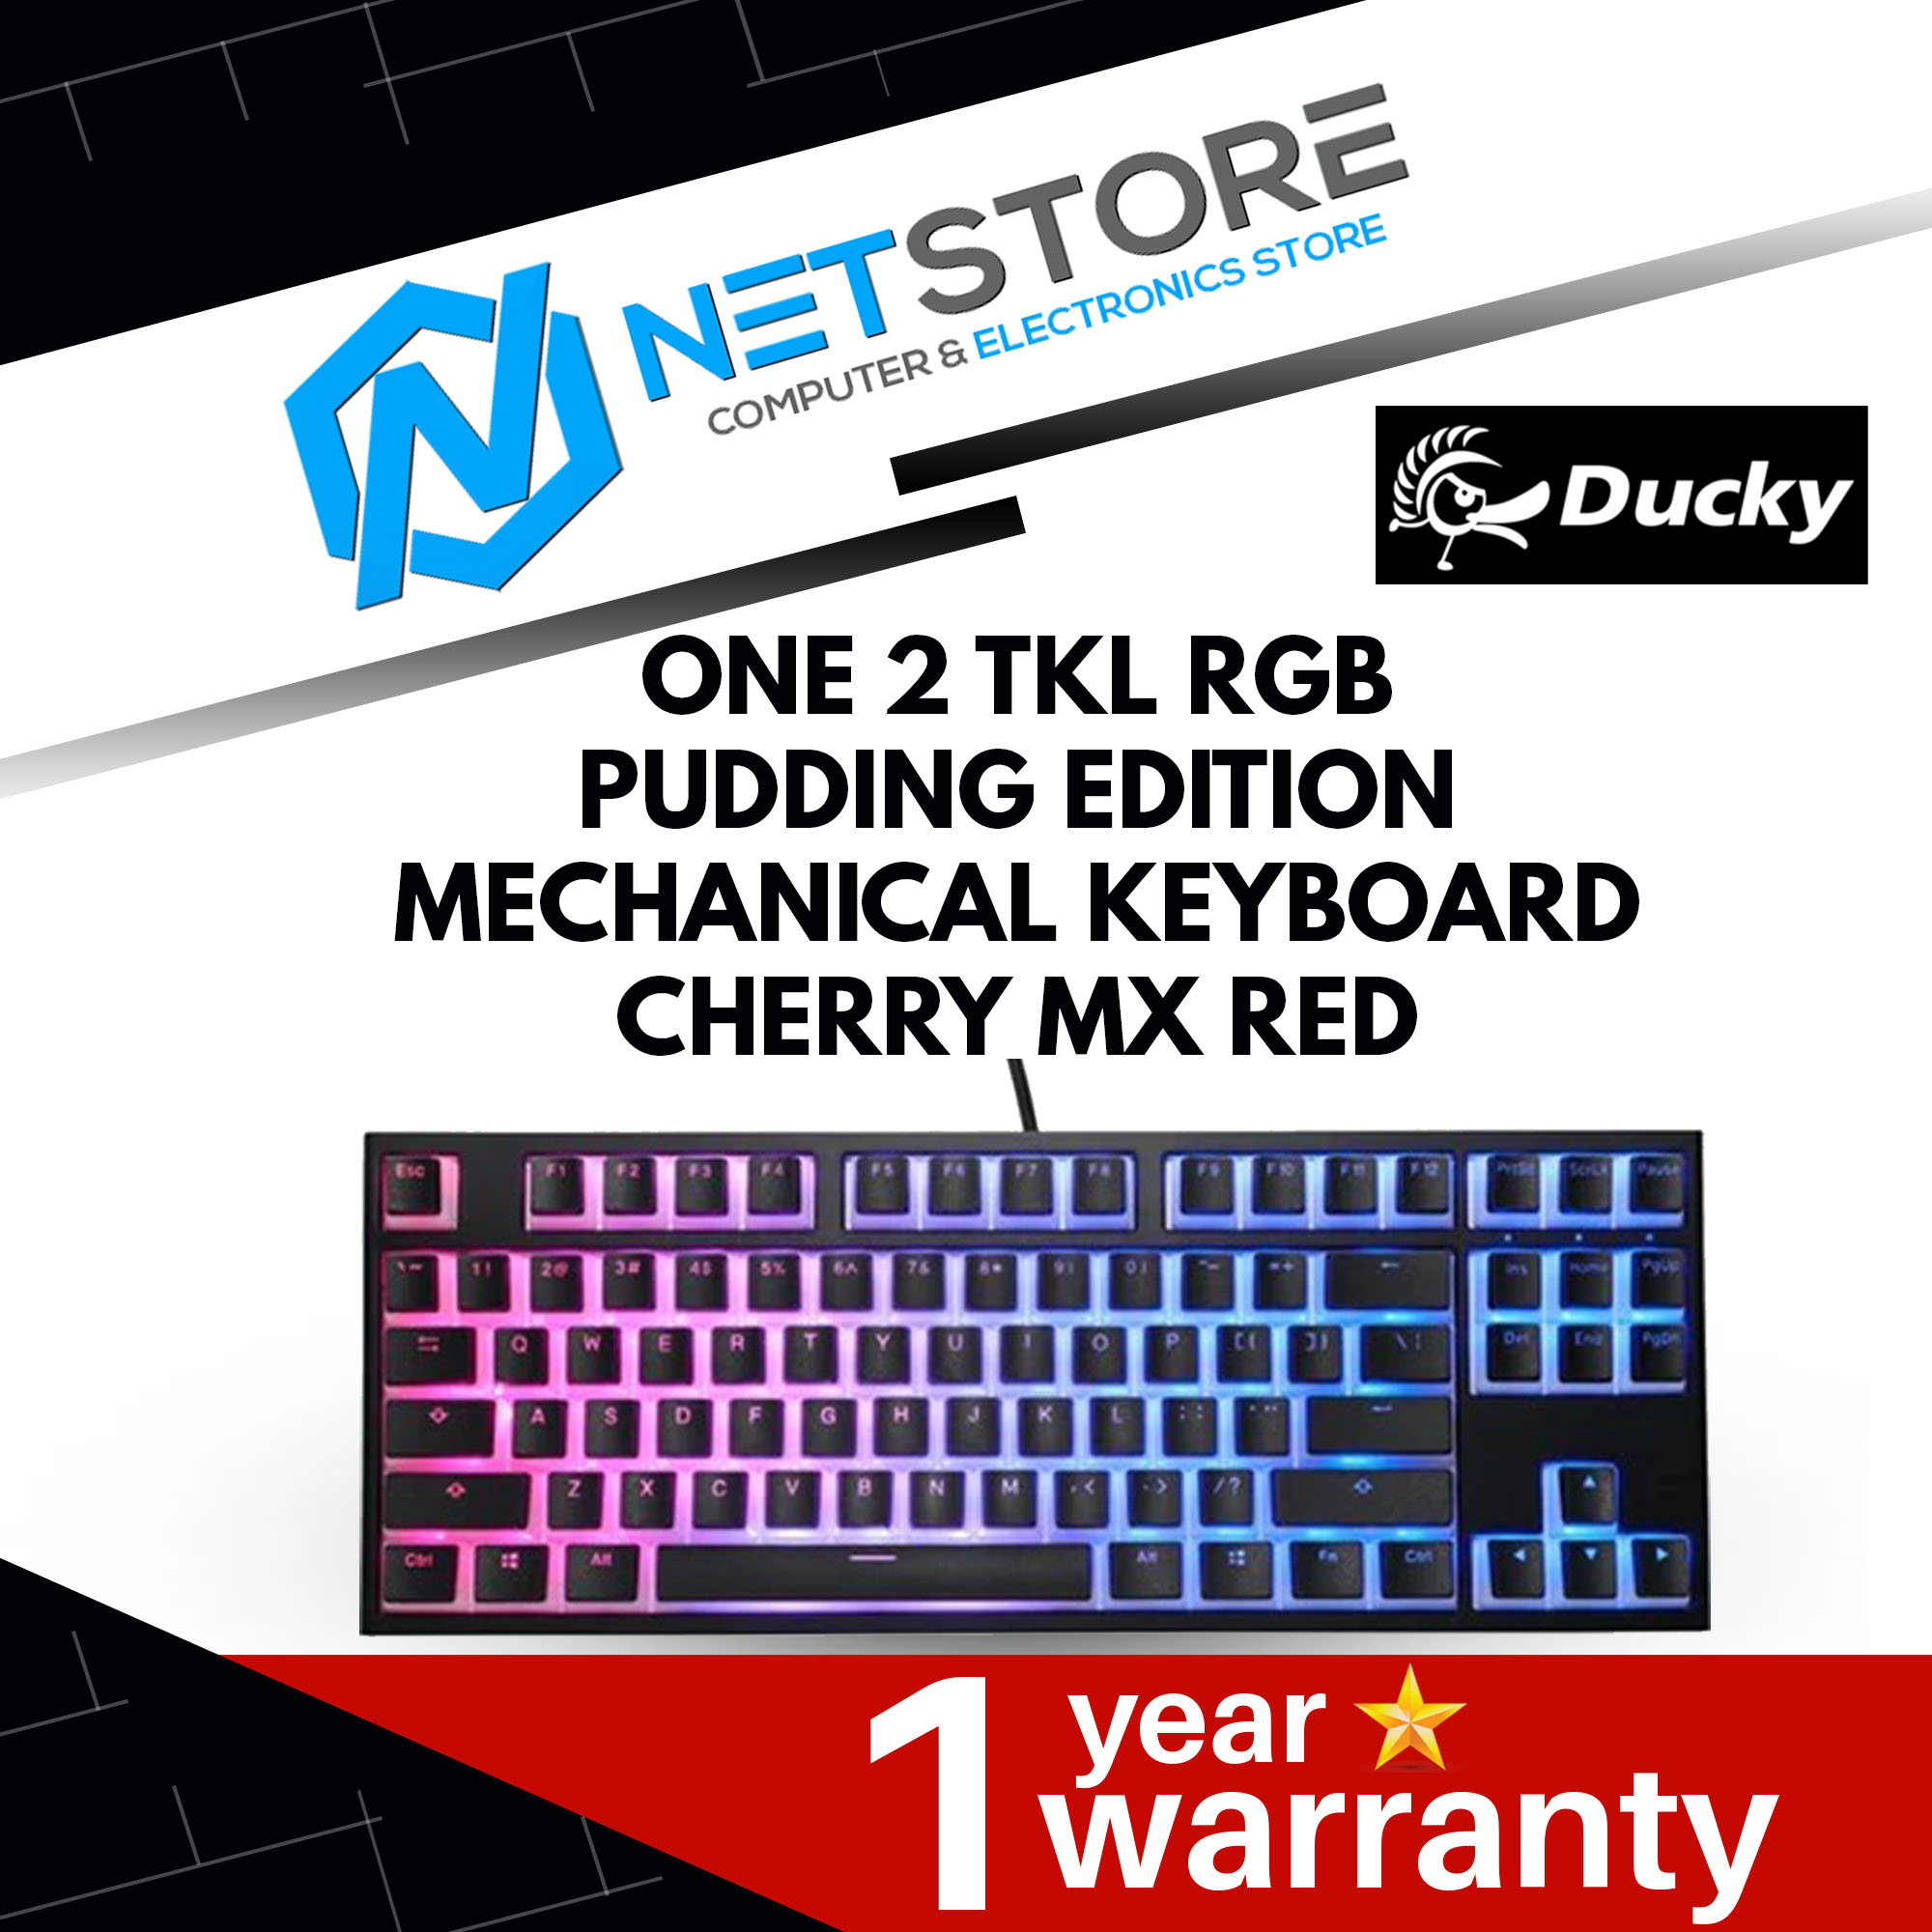 DUCKY ONE 2 TKL RGB PUDDING EDITION MECHANICAL KEYBOARD-CHERRY MX RED